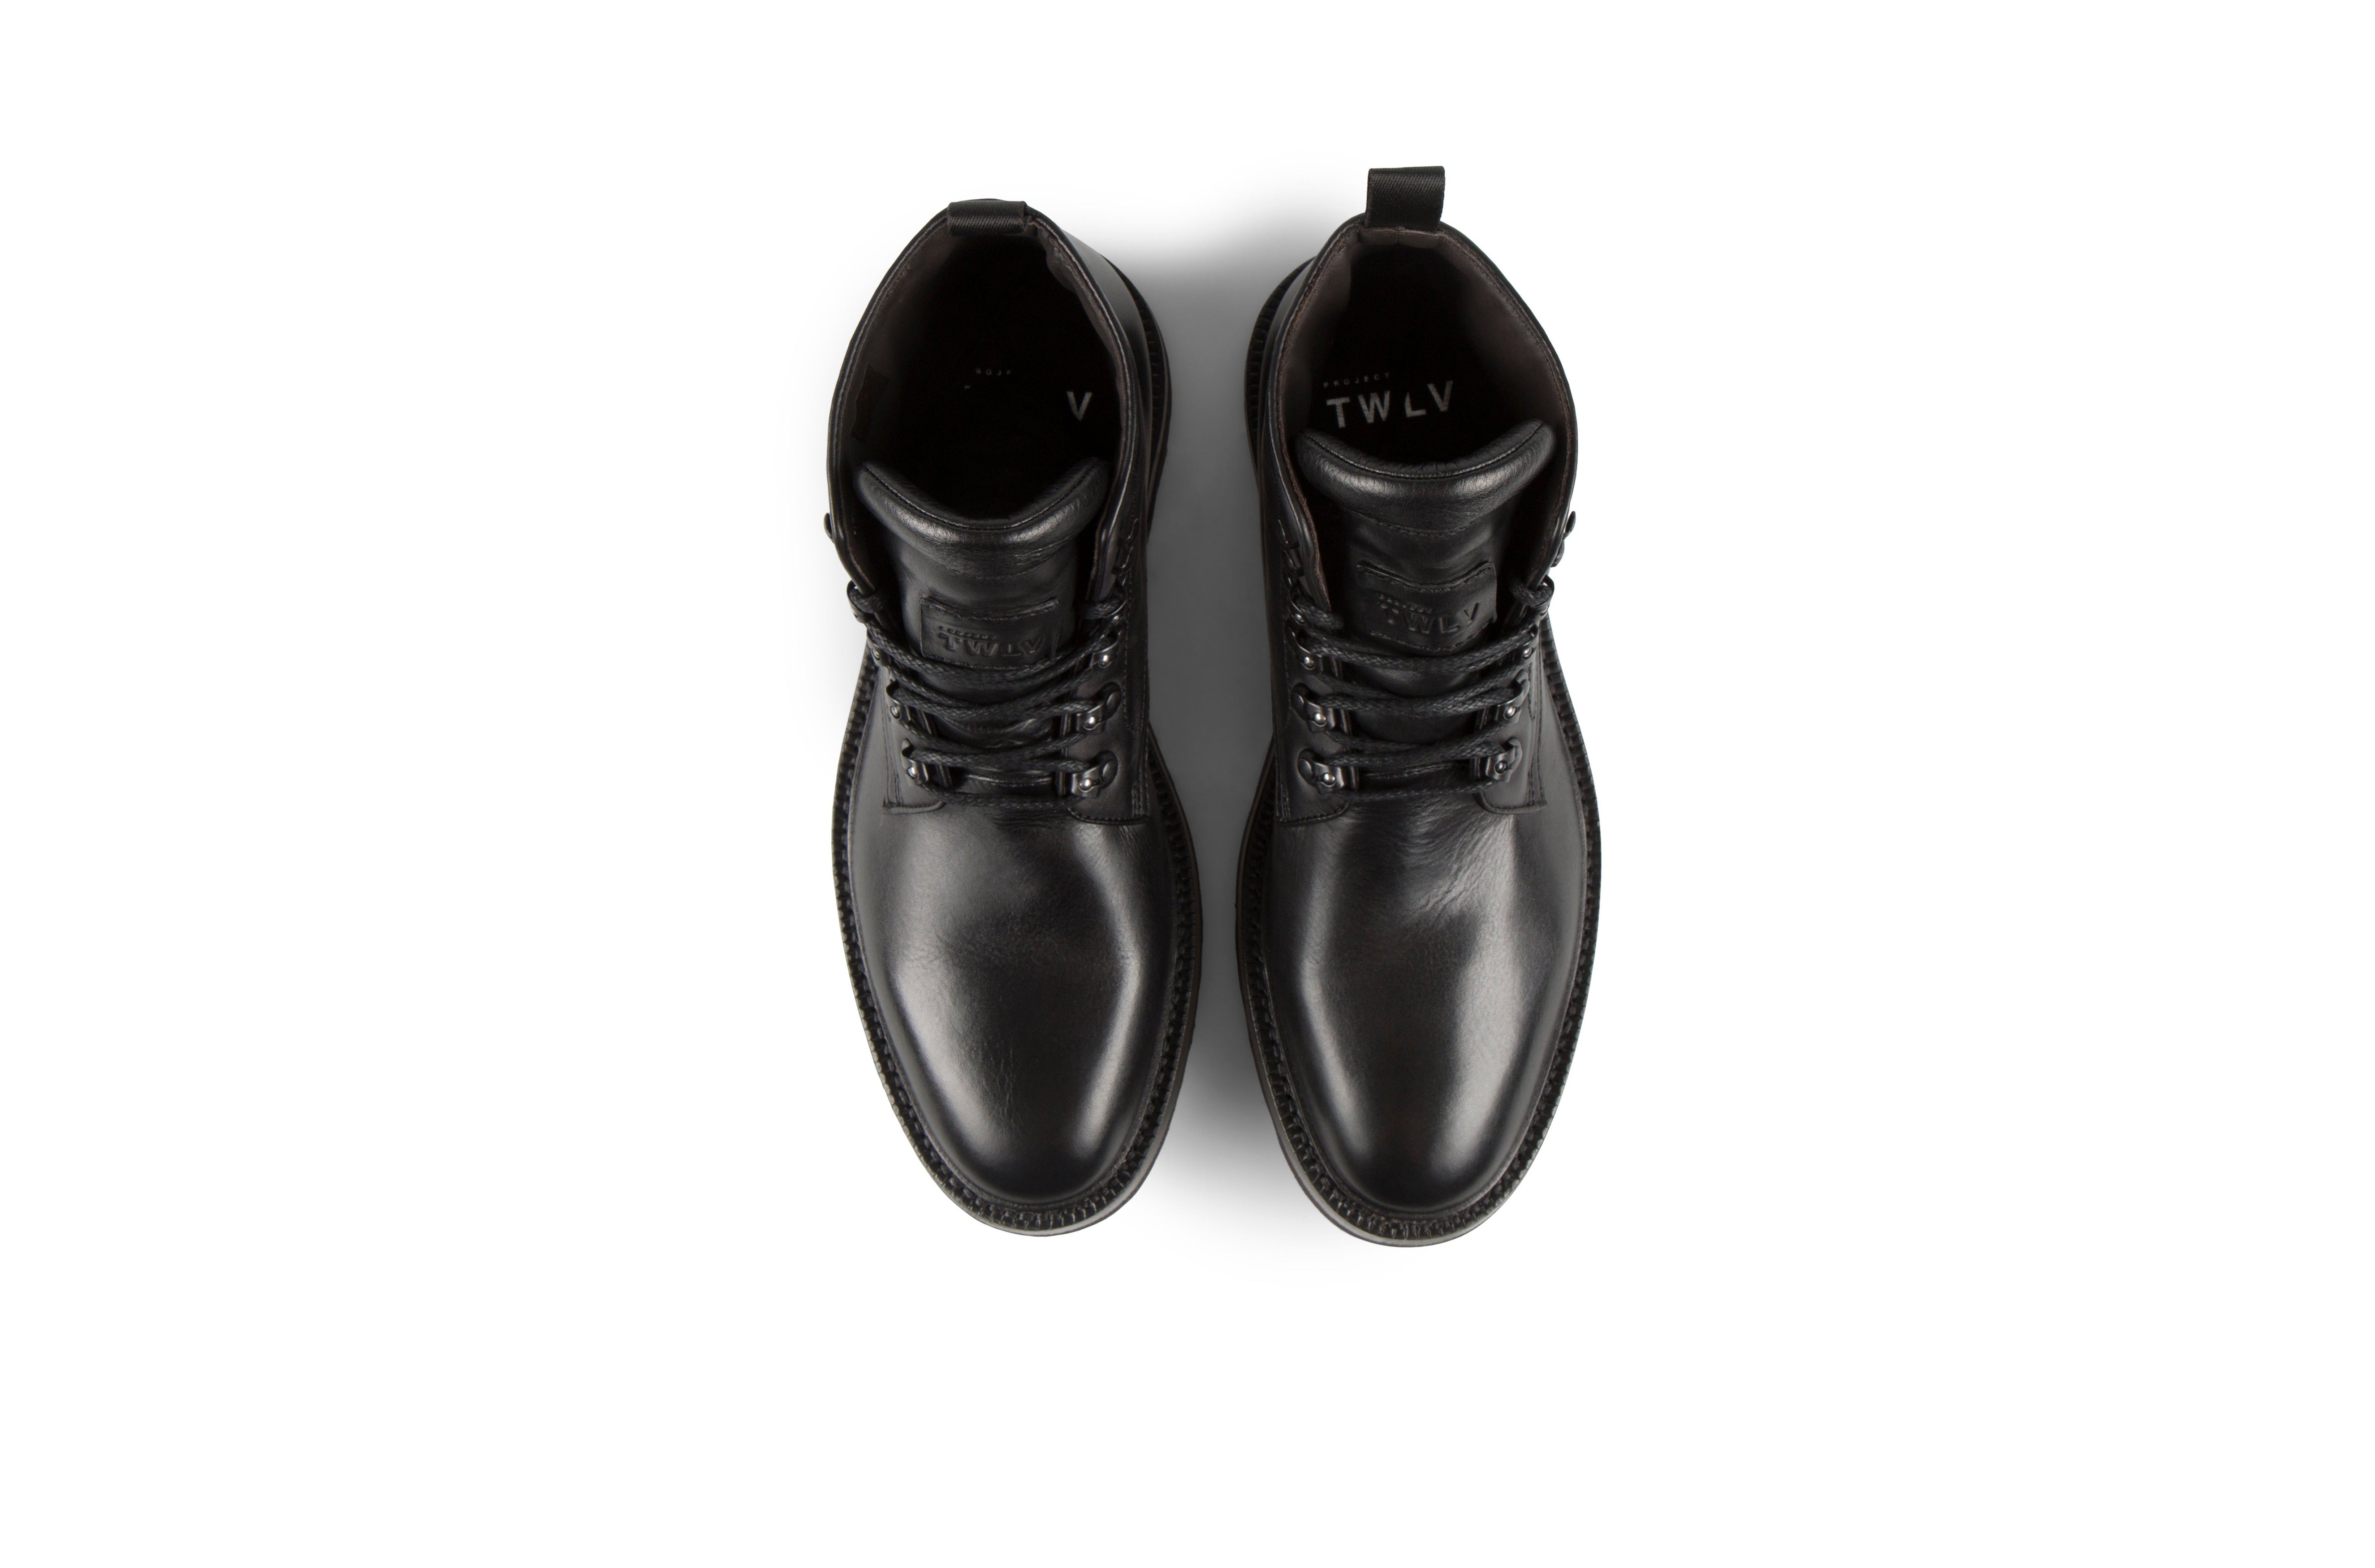 Play Black Cordovan Leather Balmoral Boots